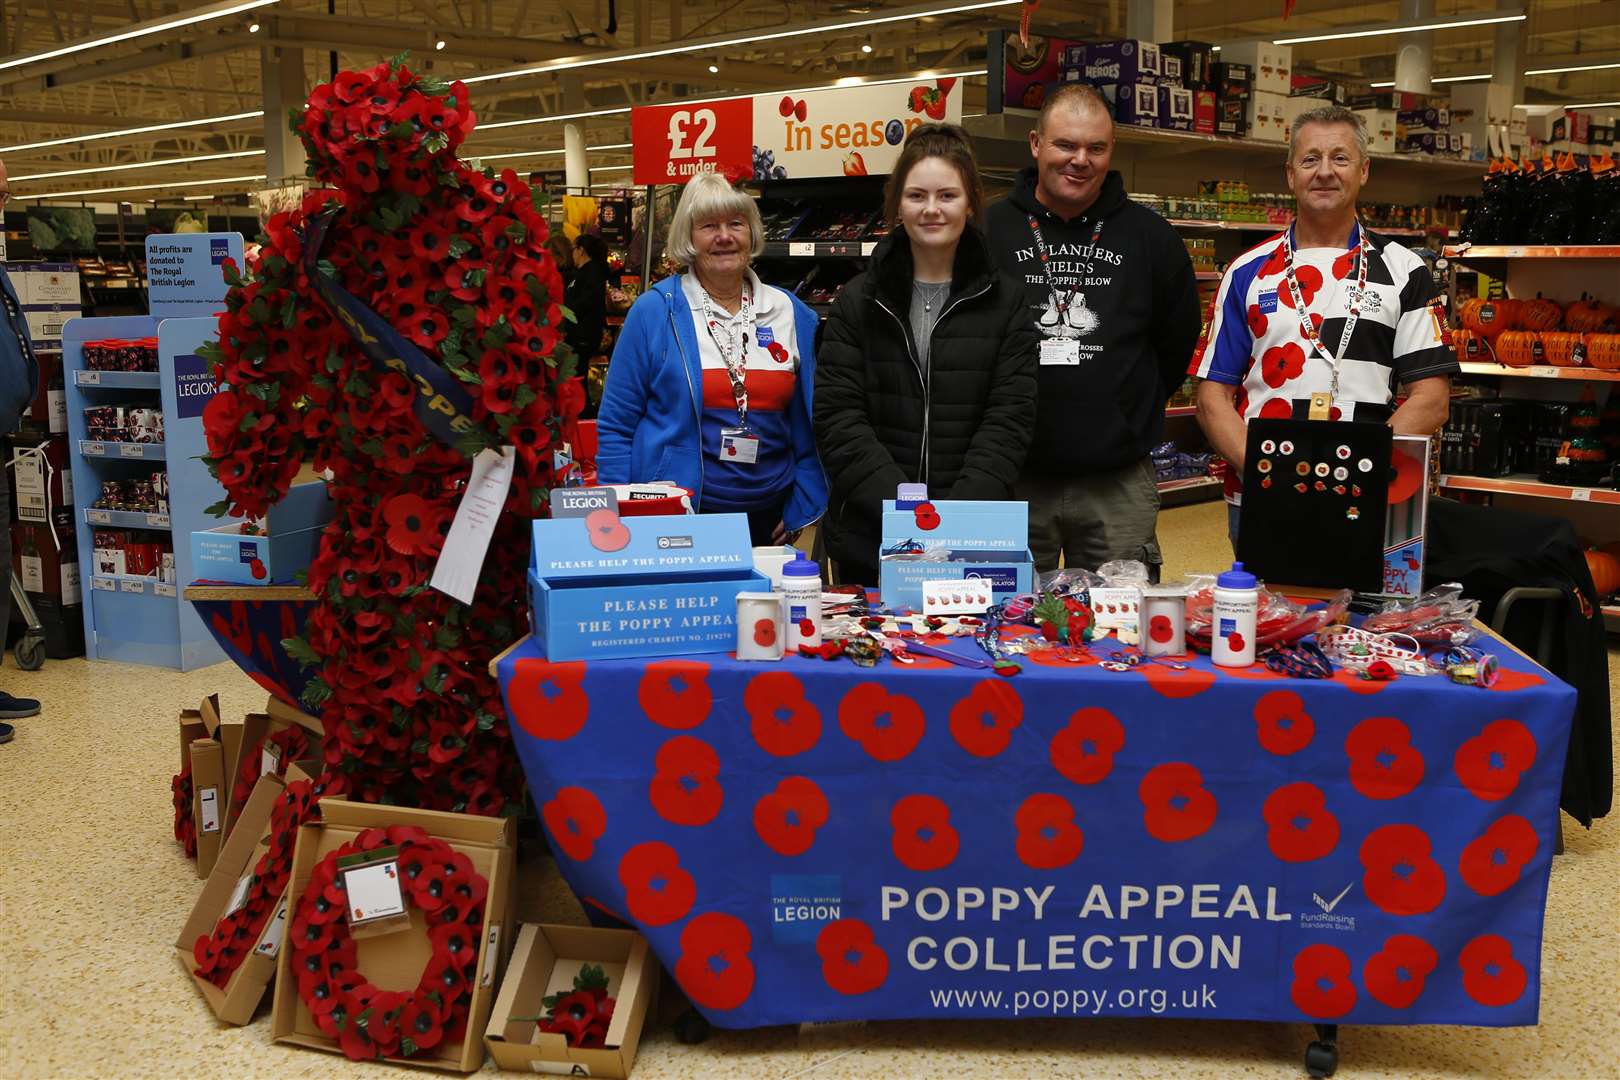 Doris Taylor, Katie Taylor, Dave Taylor & Michael Terry inside the store with their Poppy Appeal stand.